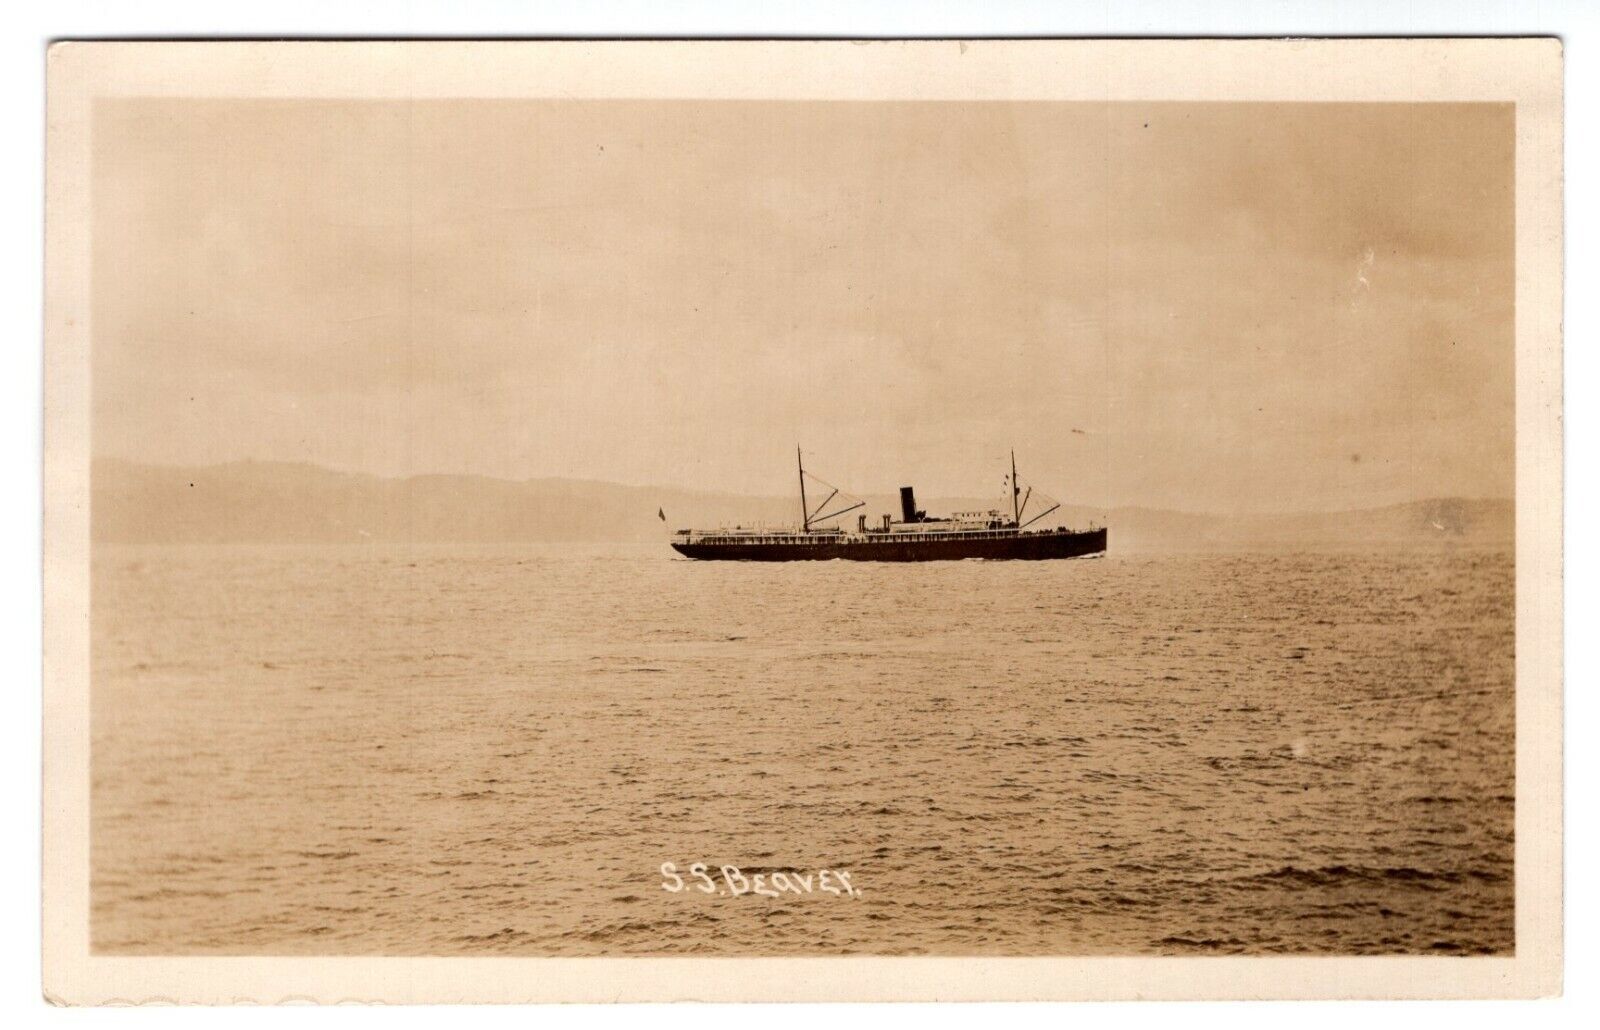 SS Beaver Cruise Ship Real Photo Poster painting RPPC Antique Postcard